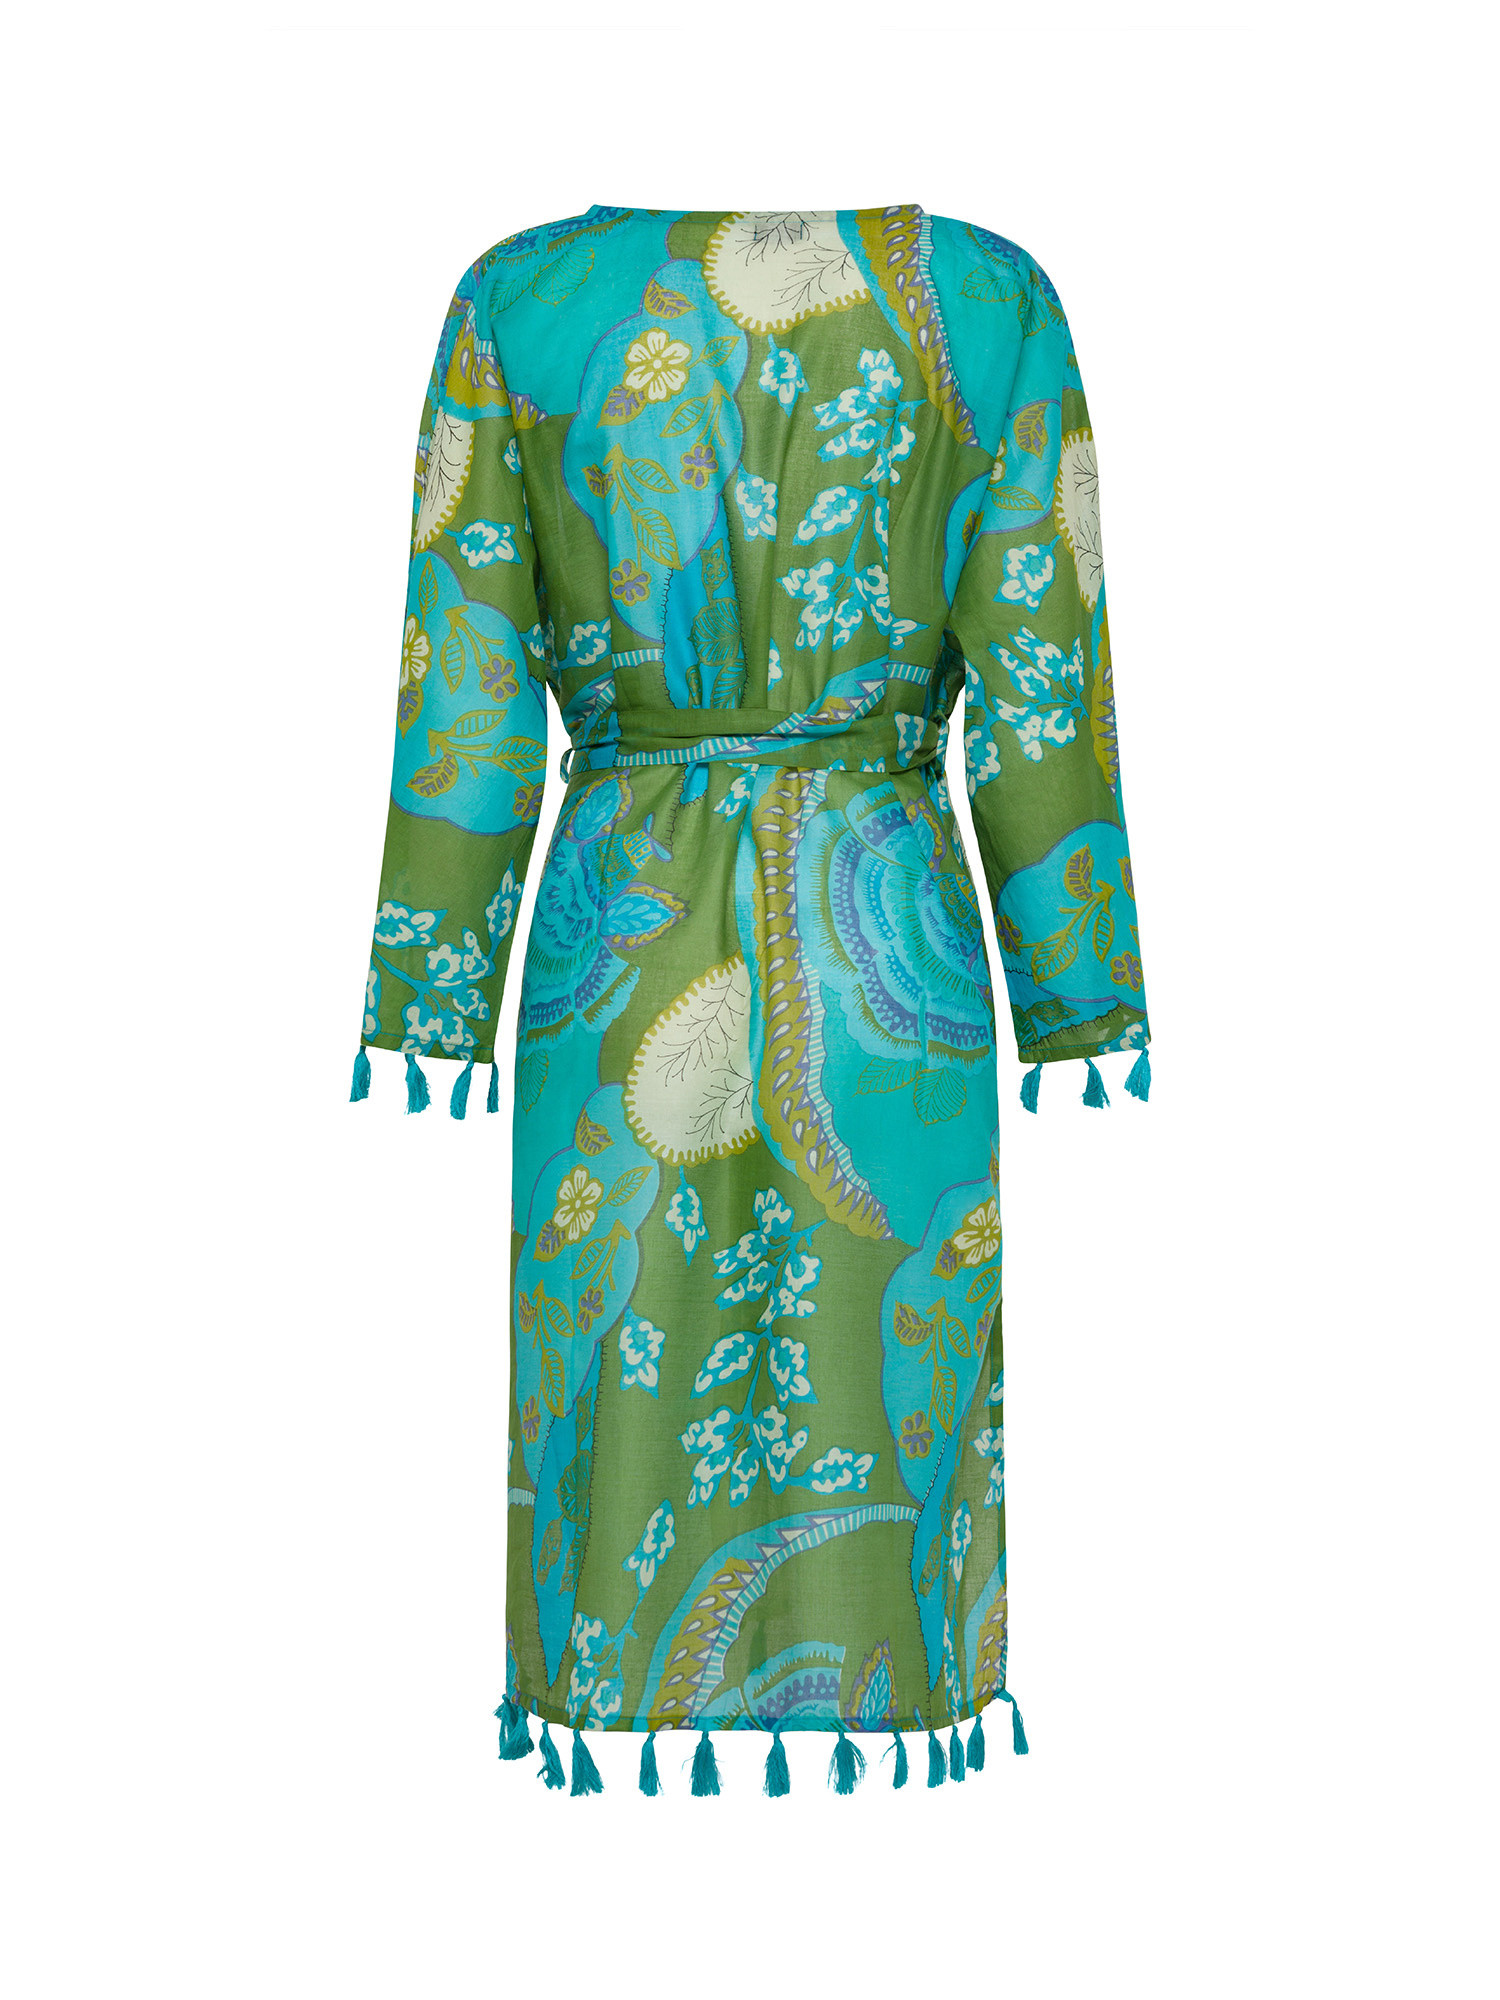 Koan - Cotton cover-up tunic with print, Green, large image number 1